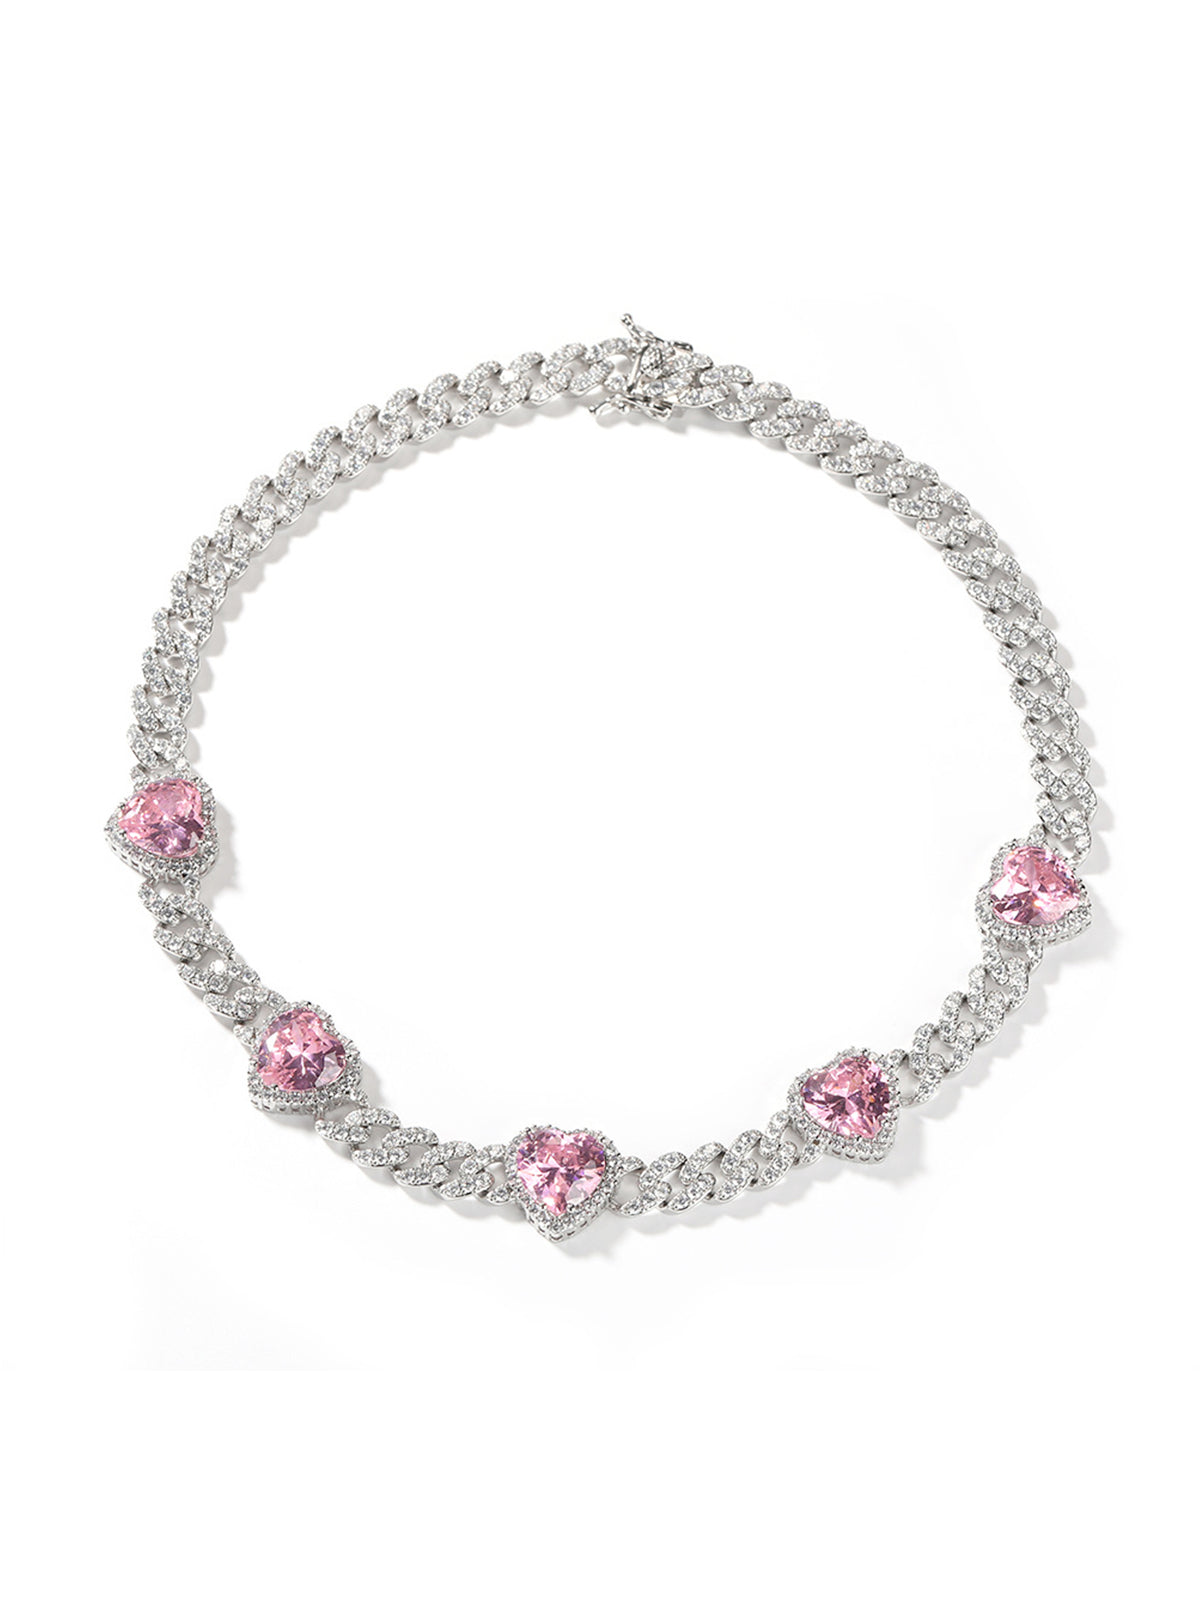 Heart-shaped diamond-studded ladies’ Necklace